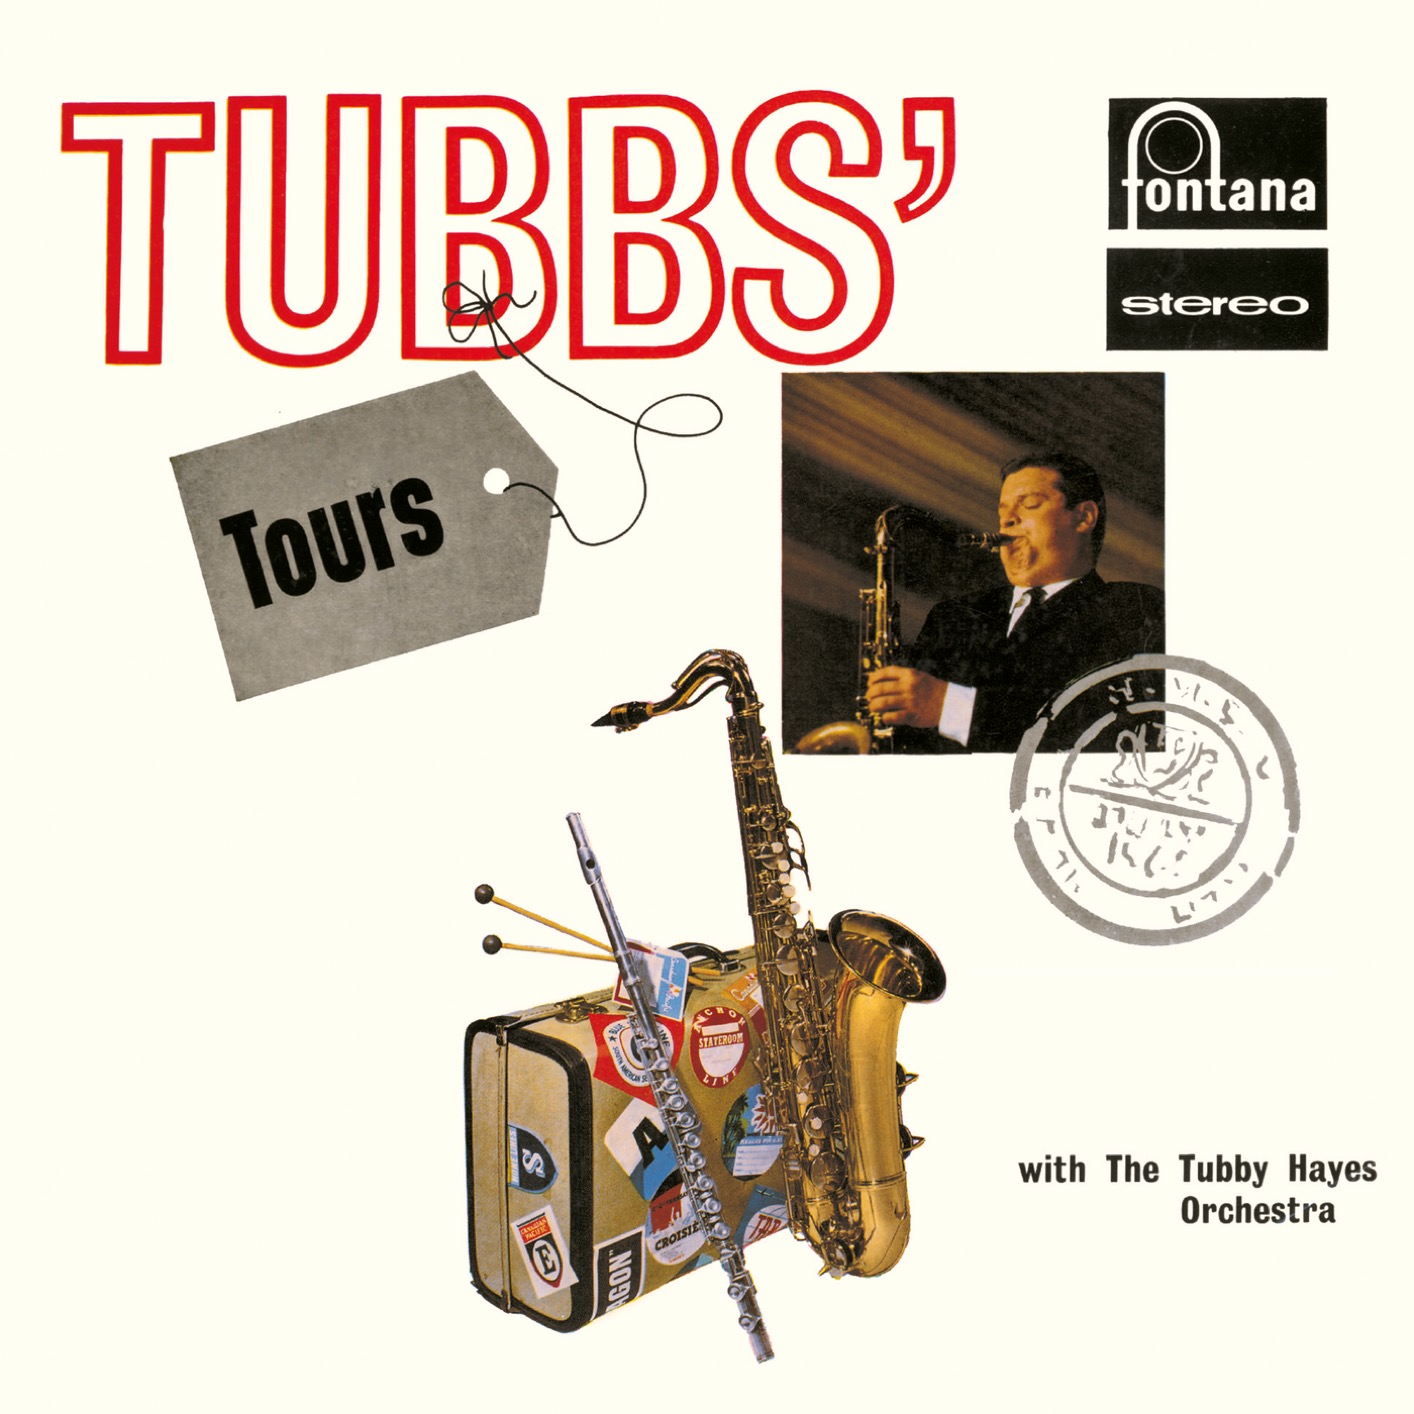 The Tubby Hayes Orchestra – Tubbs’ Tours (Remastered) (1963/2019) [FLAC 24bit/88,2kHz]